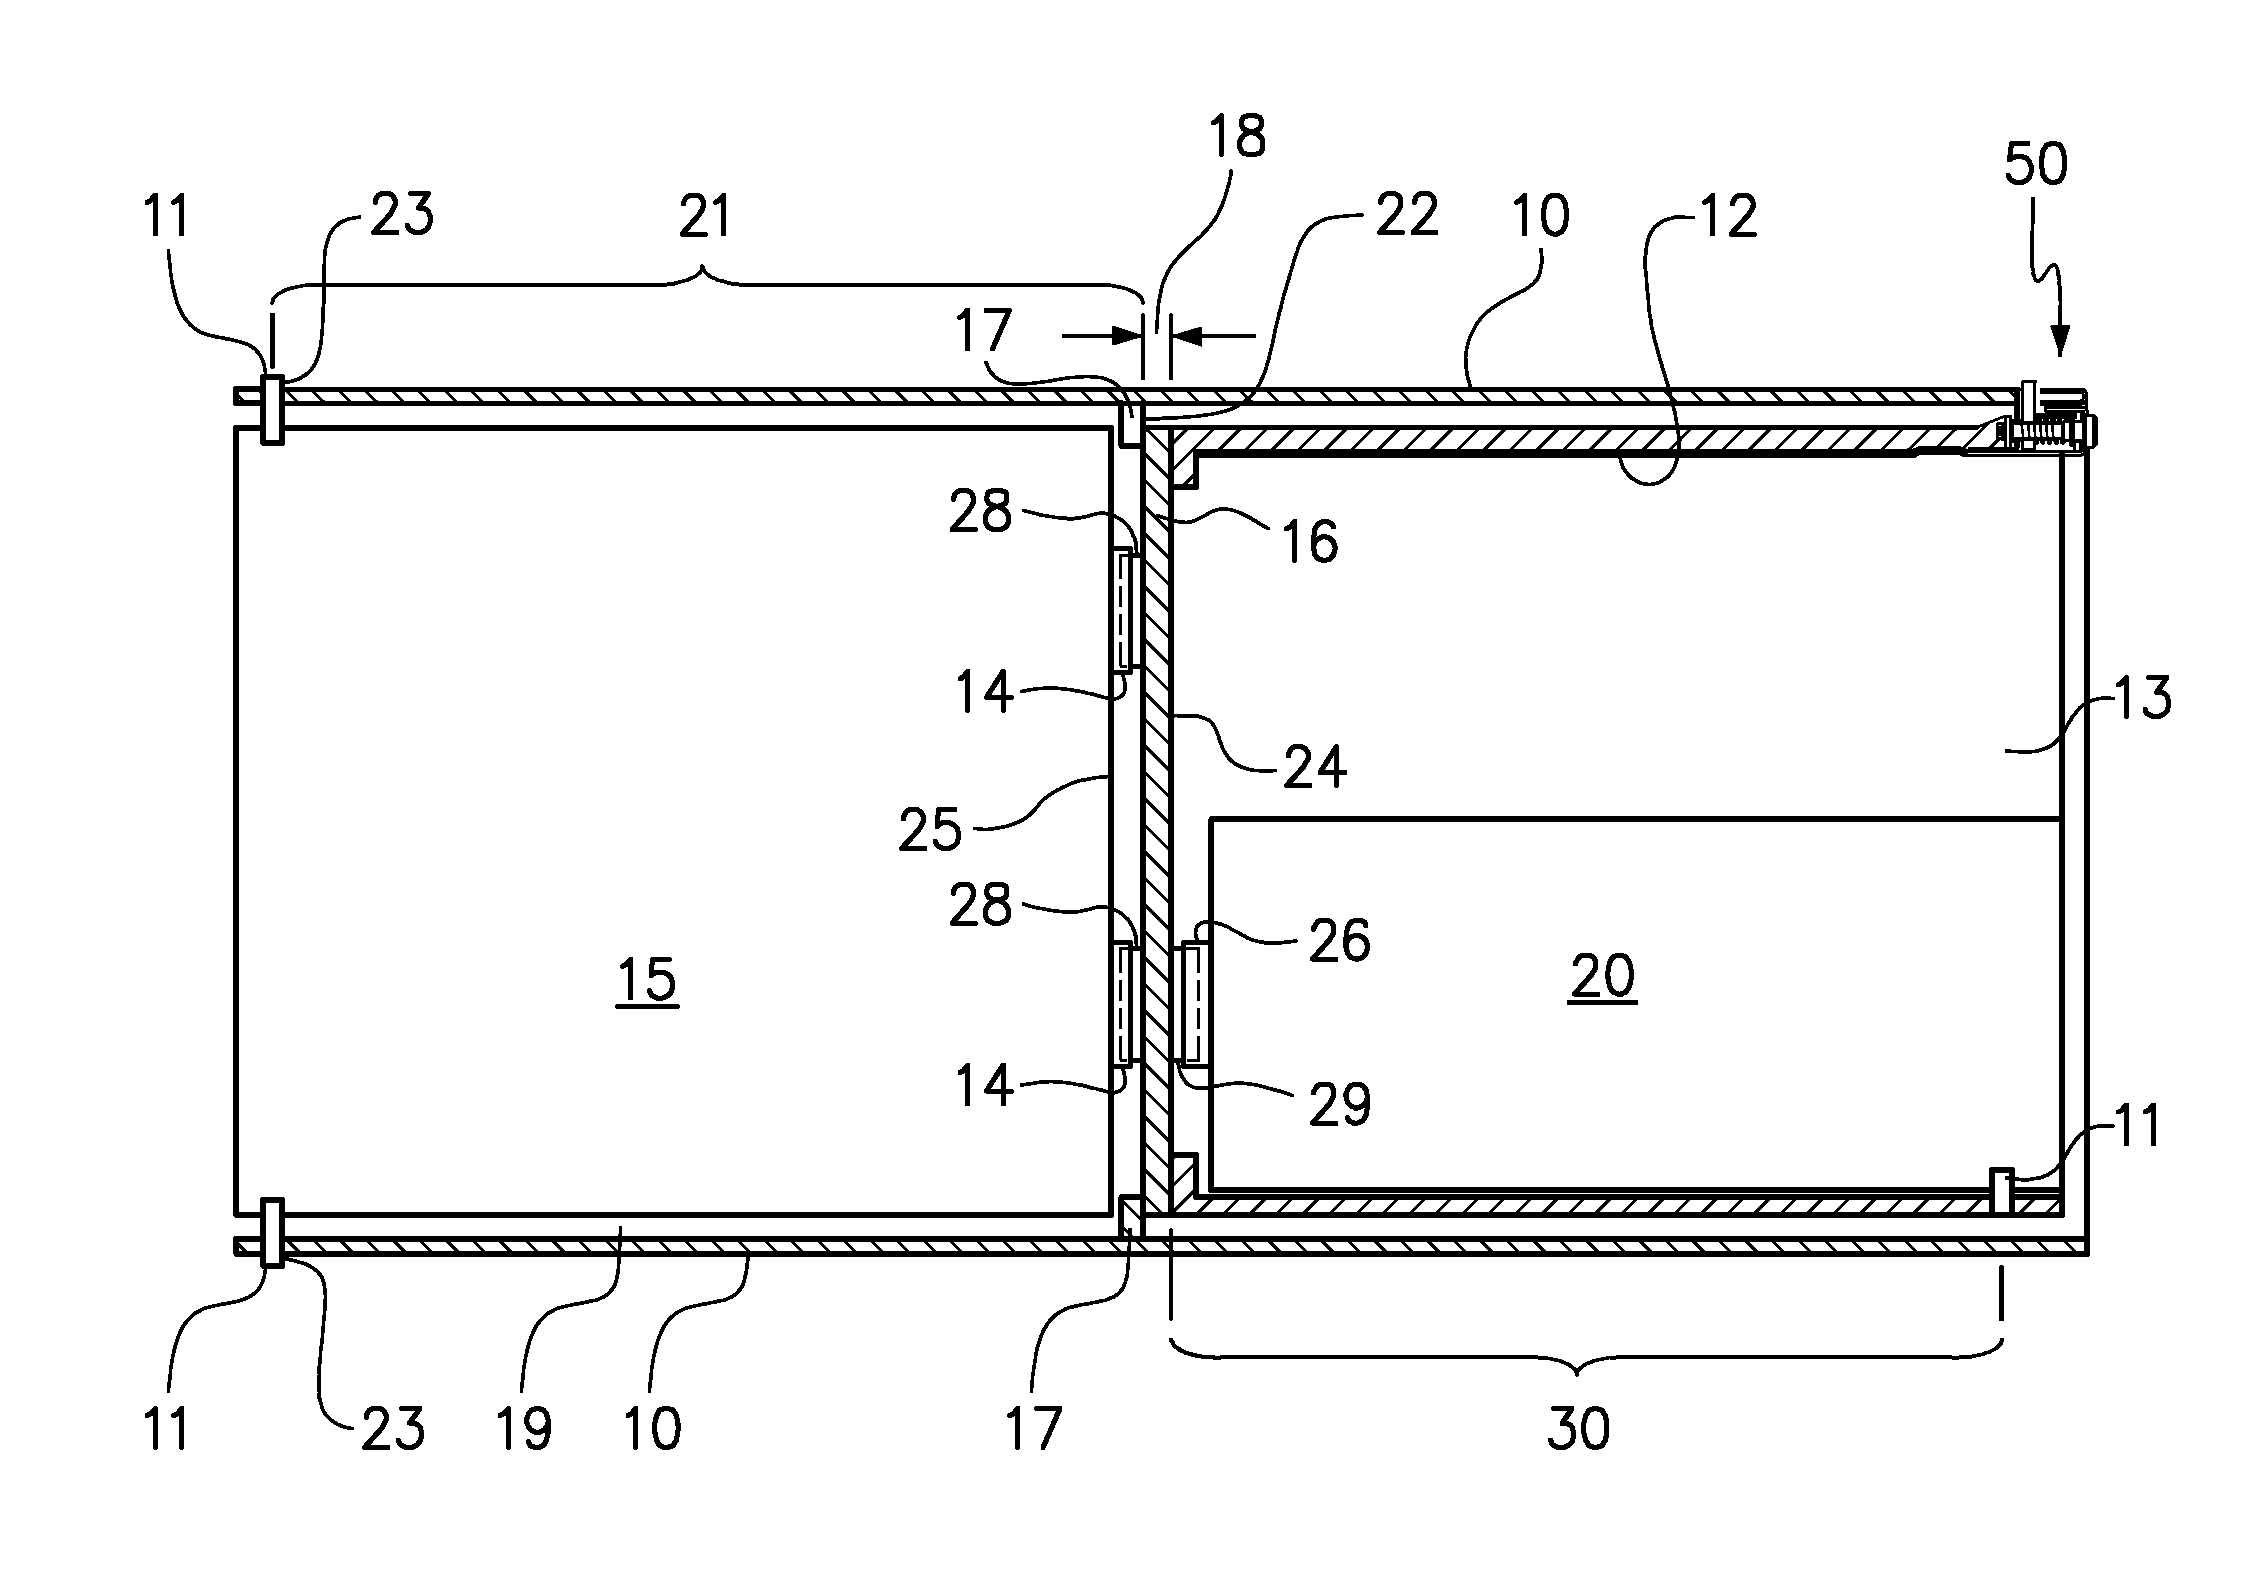 Securing electronic devices within a sub-chassis for connection to a chassis midplane